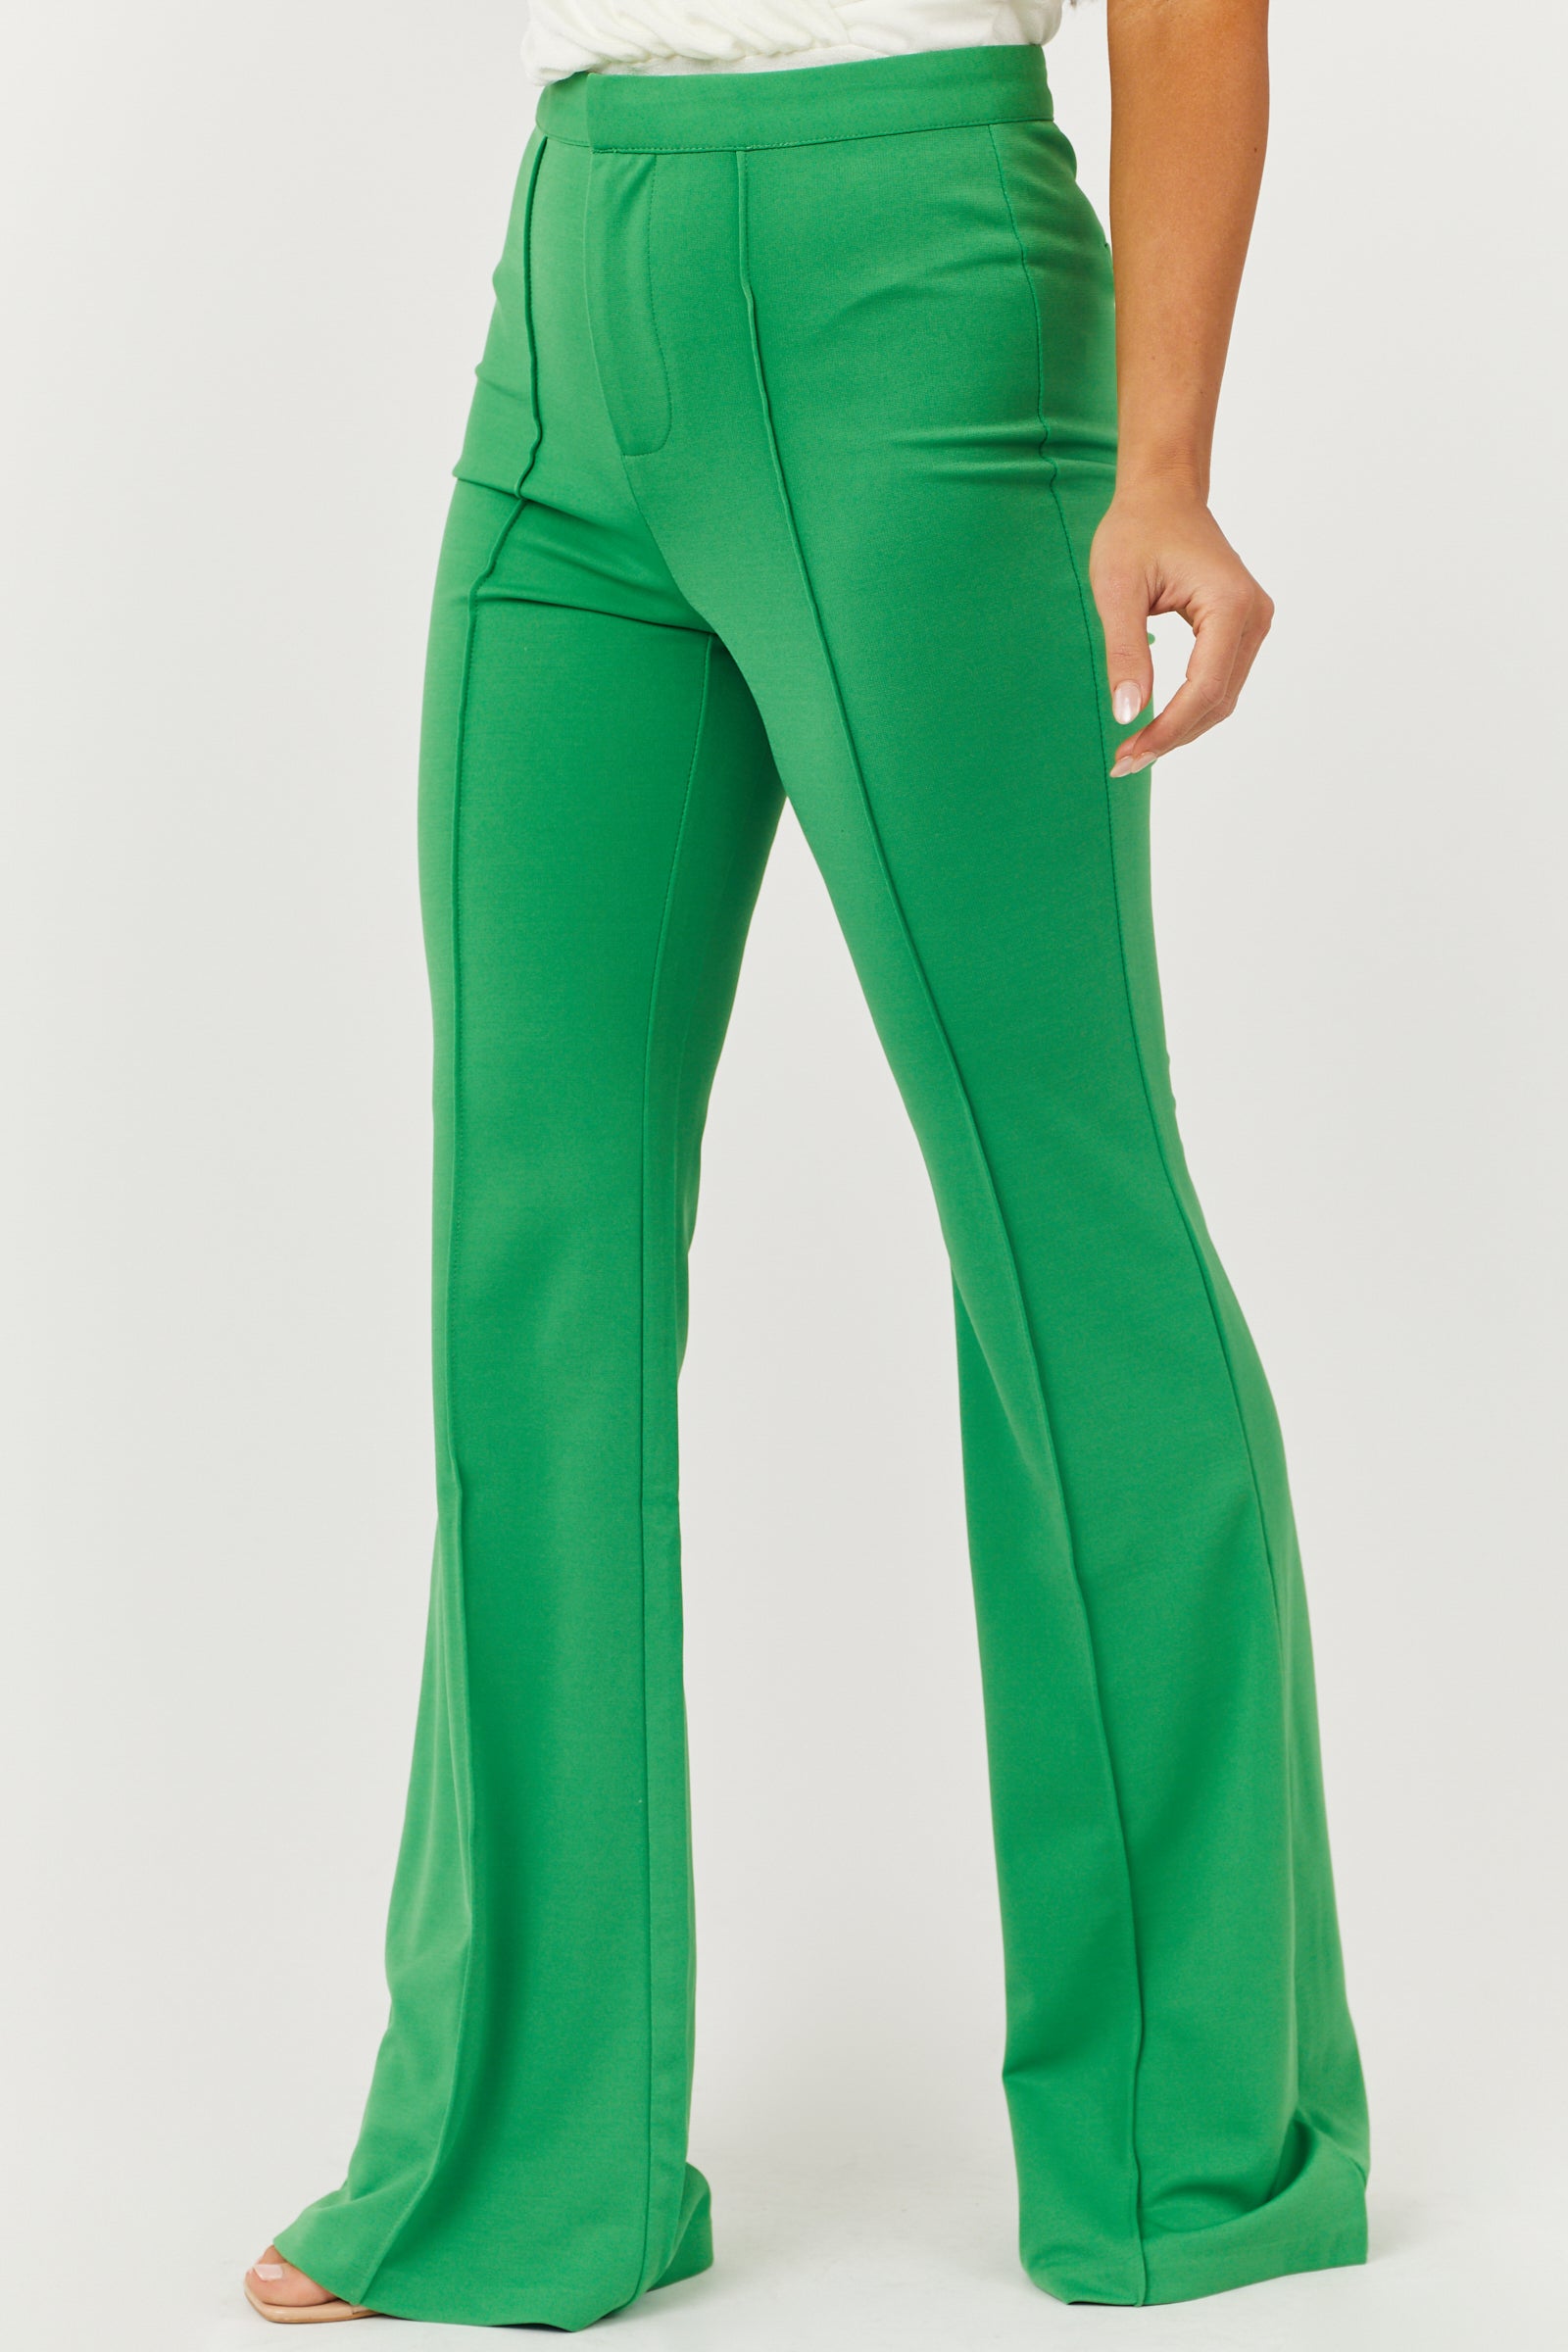 Kyo The Brand flare pants - part of s 3-piece set in light green pinstripe  | ASOS